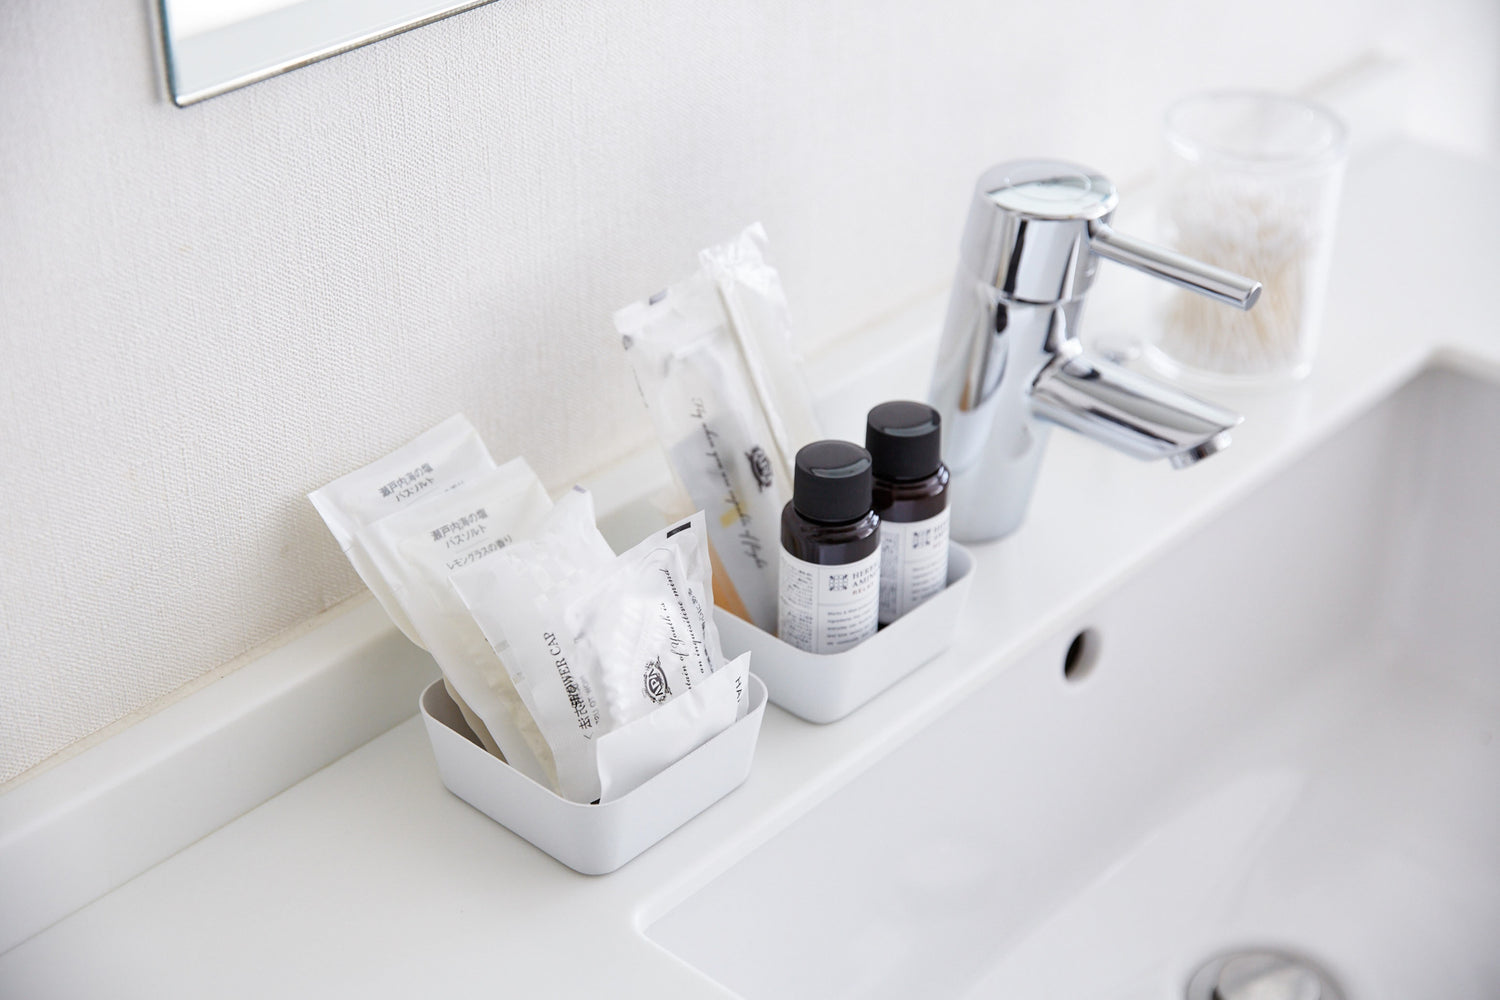 View 3 - Small white Accessory Trays holding beauty items on bathroom sink counter by Yamazaki Home.